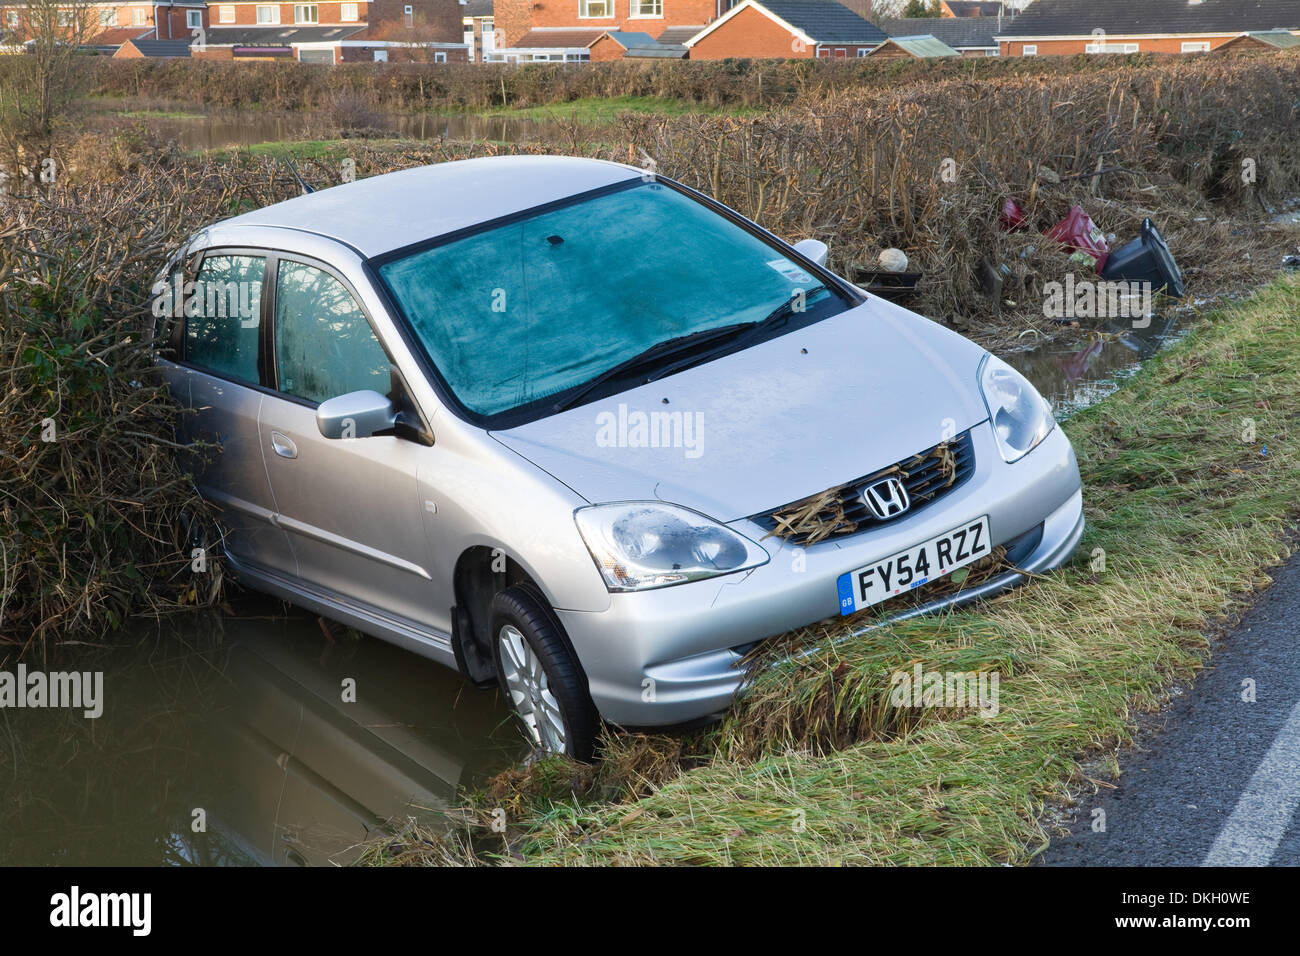 South Ferriby, North Lincolnshire, England, UK. 6th December 2013. An abandoned vehicle in the North Lincolnshire village of South Ferriby near the River Humber, which has been damaged by the tidal surge. South Ferriby, North Lincolnshire, England, UK. 6th December 2013. Credit:  LEE BEEL/Alamy Live News Stock Photo